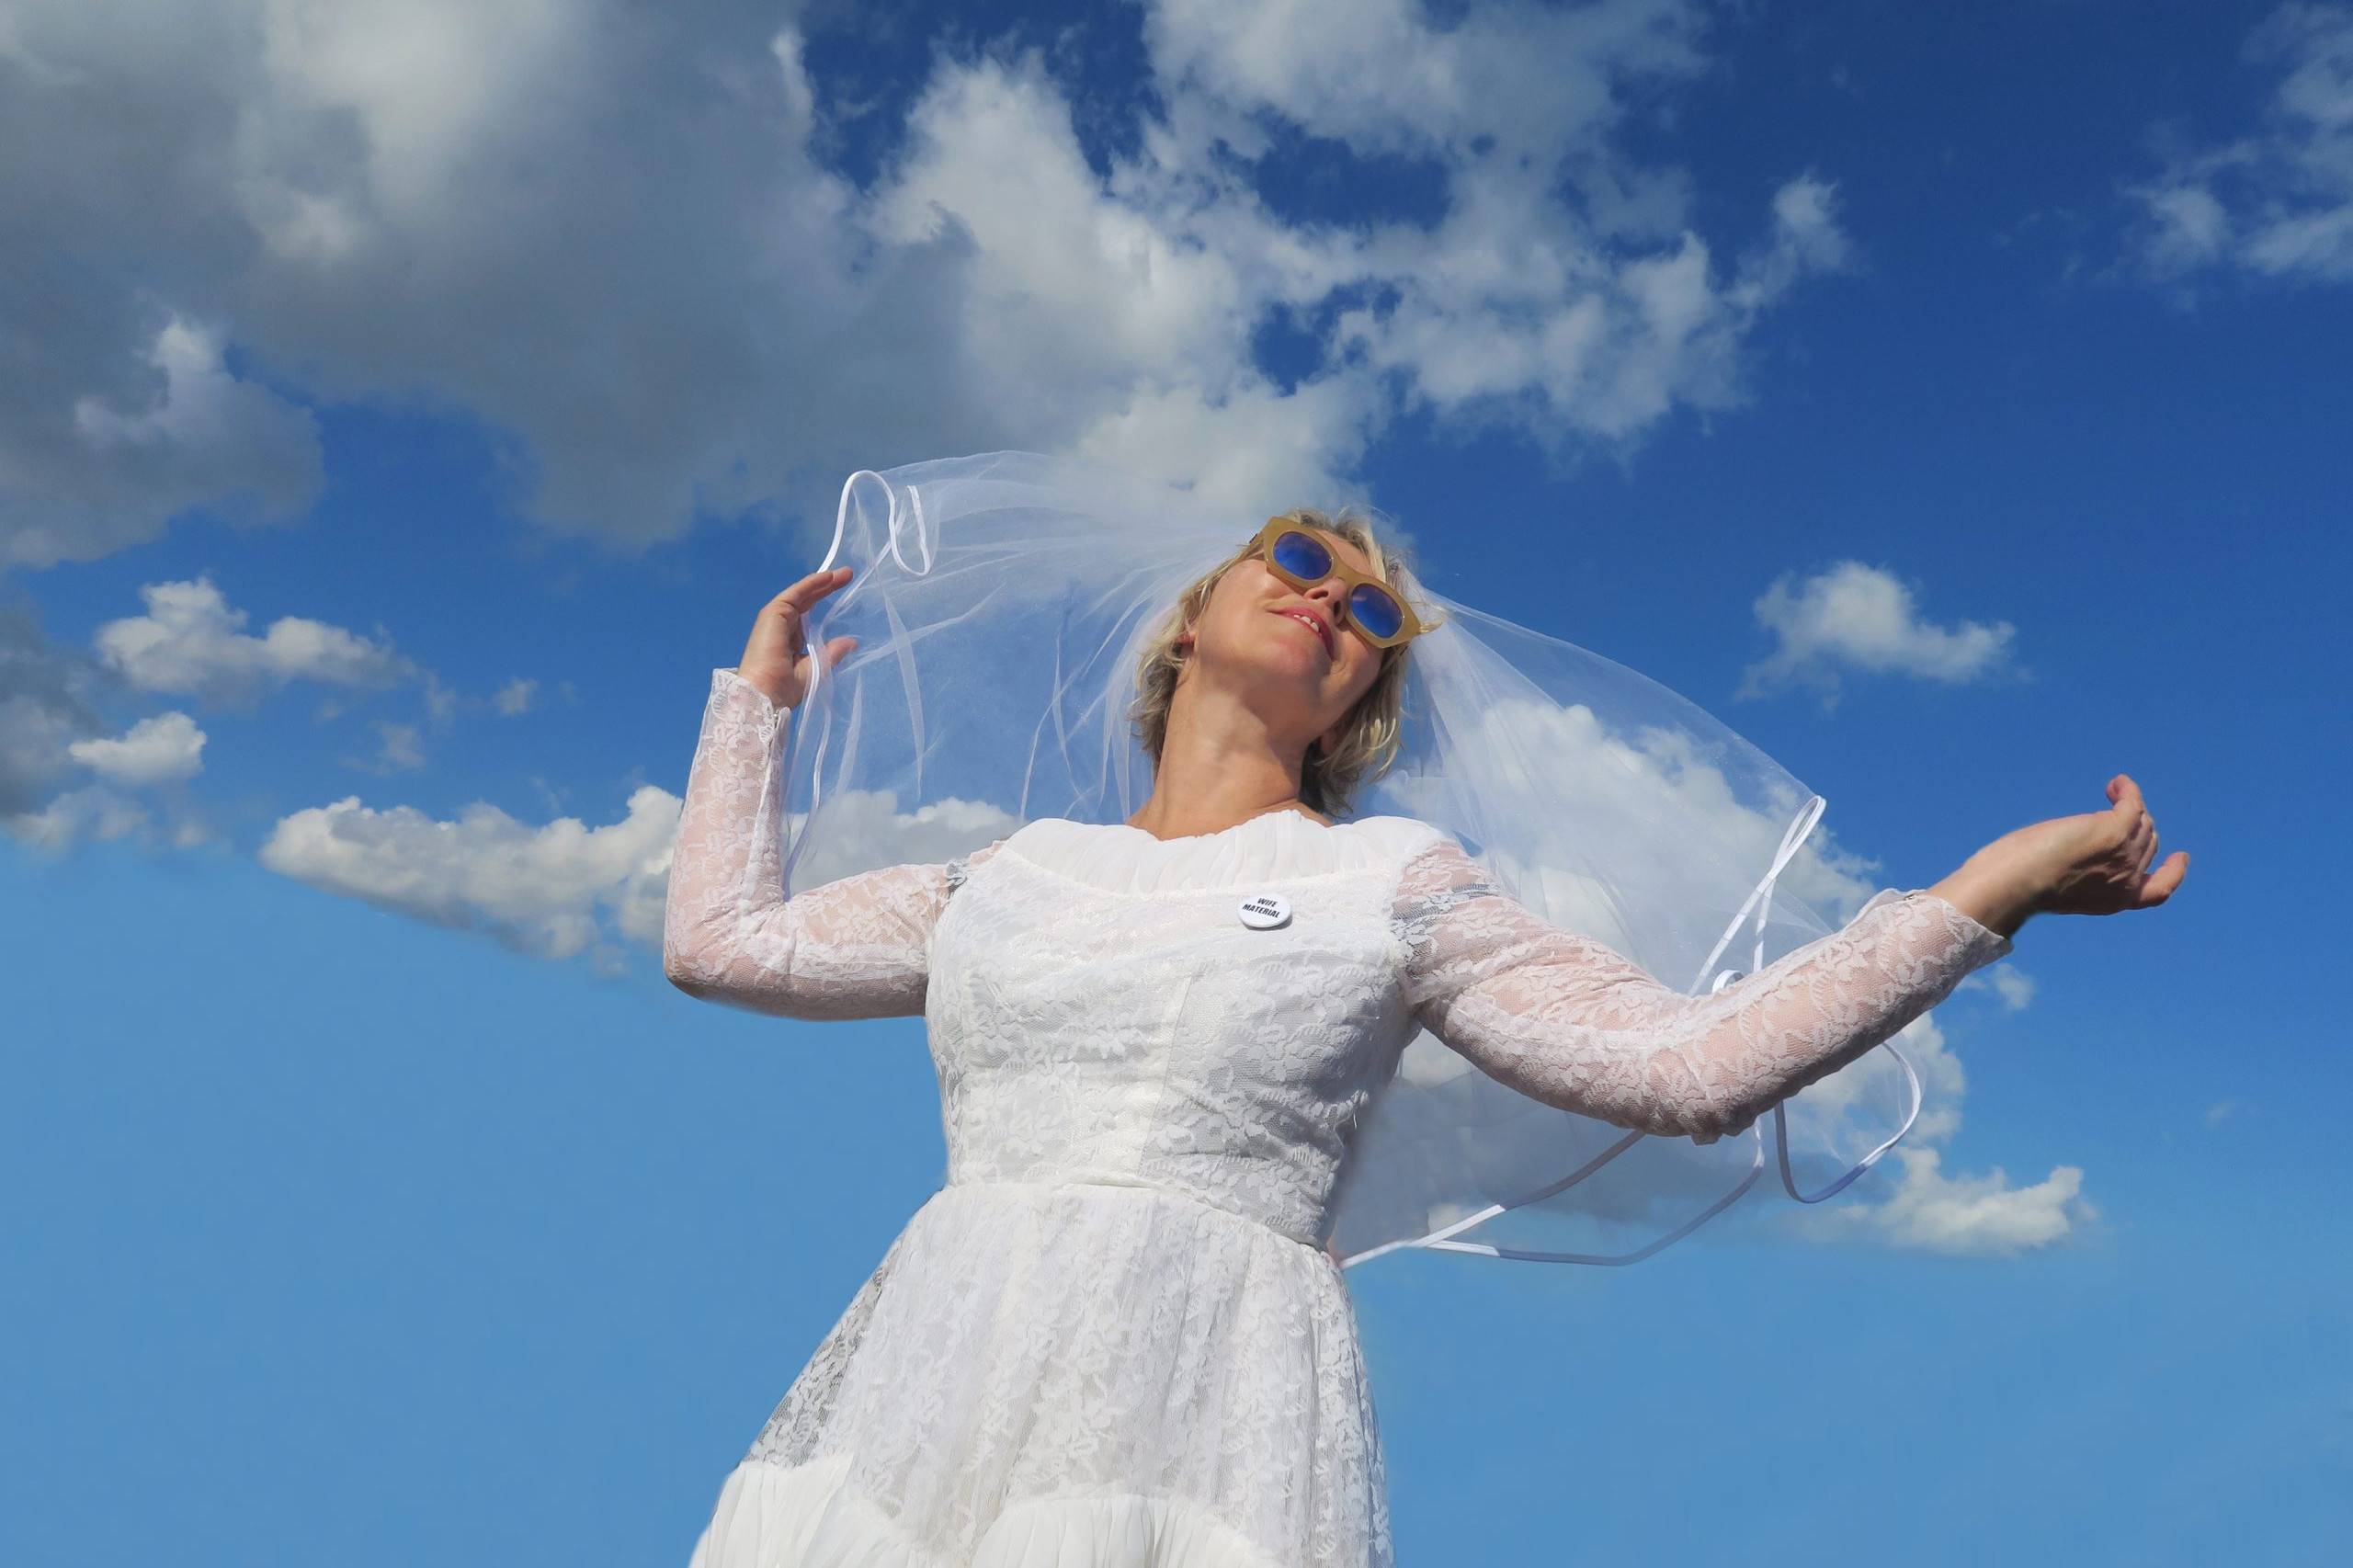 An image of a white-veiled woman in a bridal dress, wearing sunglasses and looking to the horizon against a blue sky